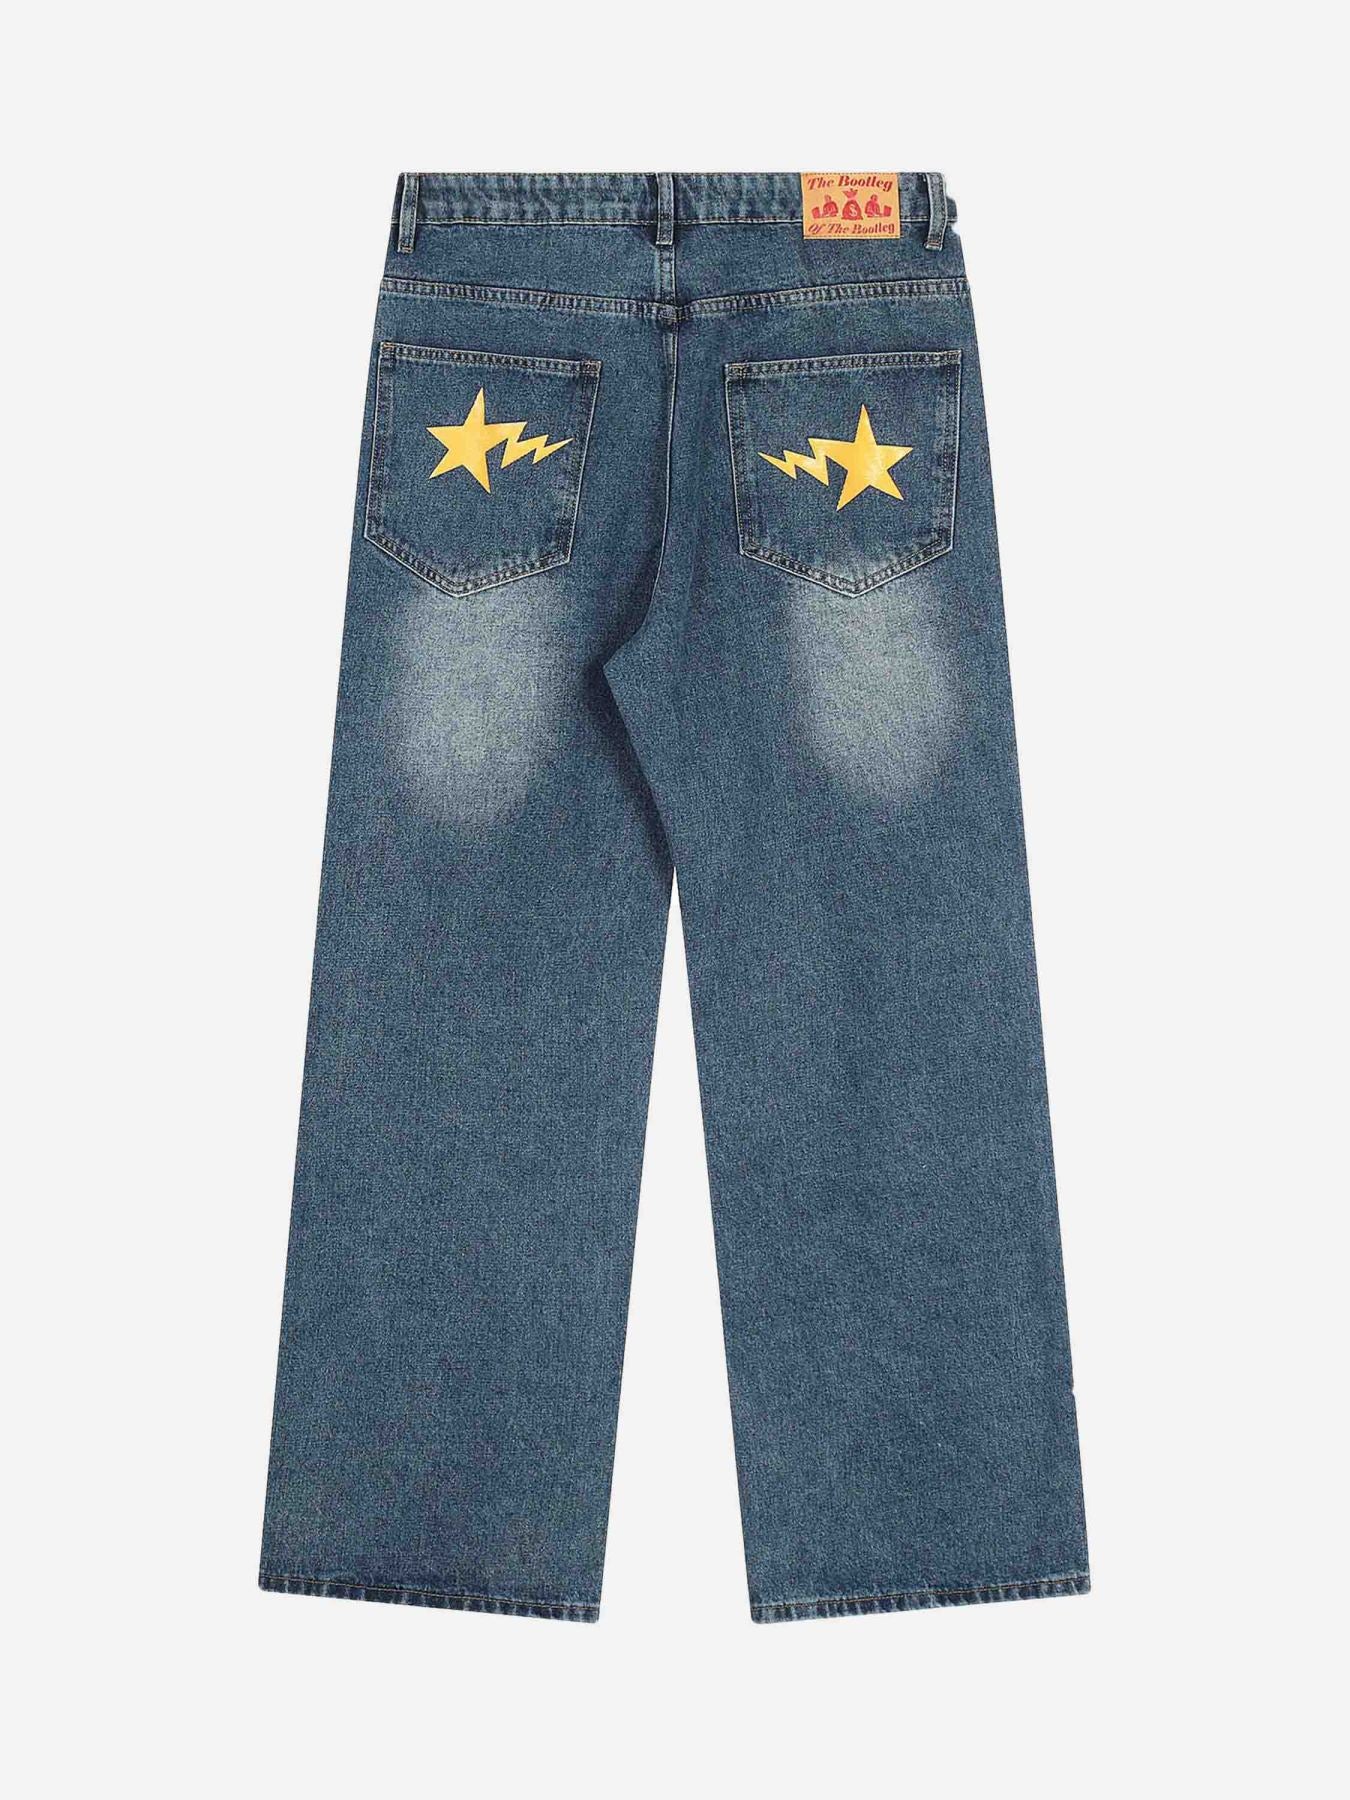 Thesupermade Personality Smiley Face Printed Jeans